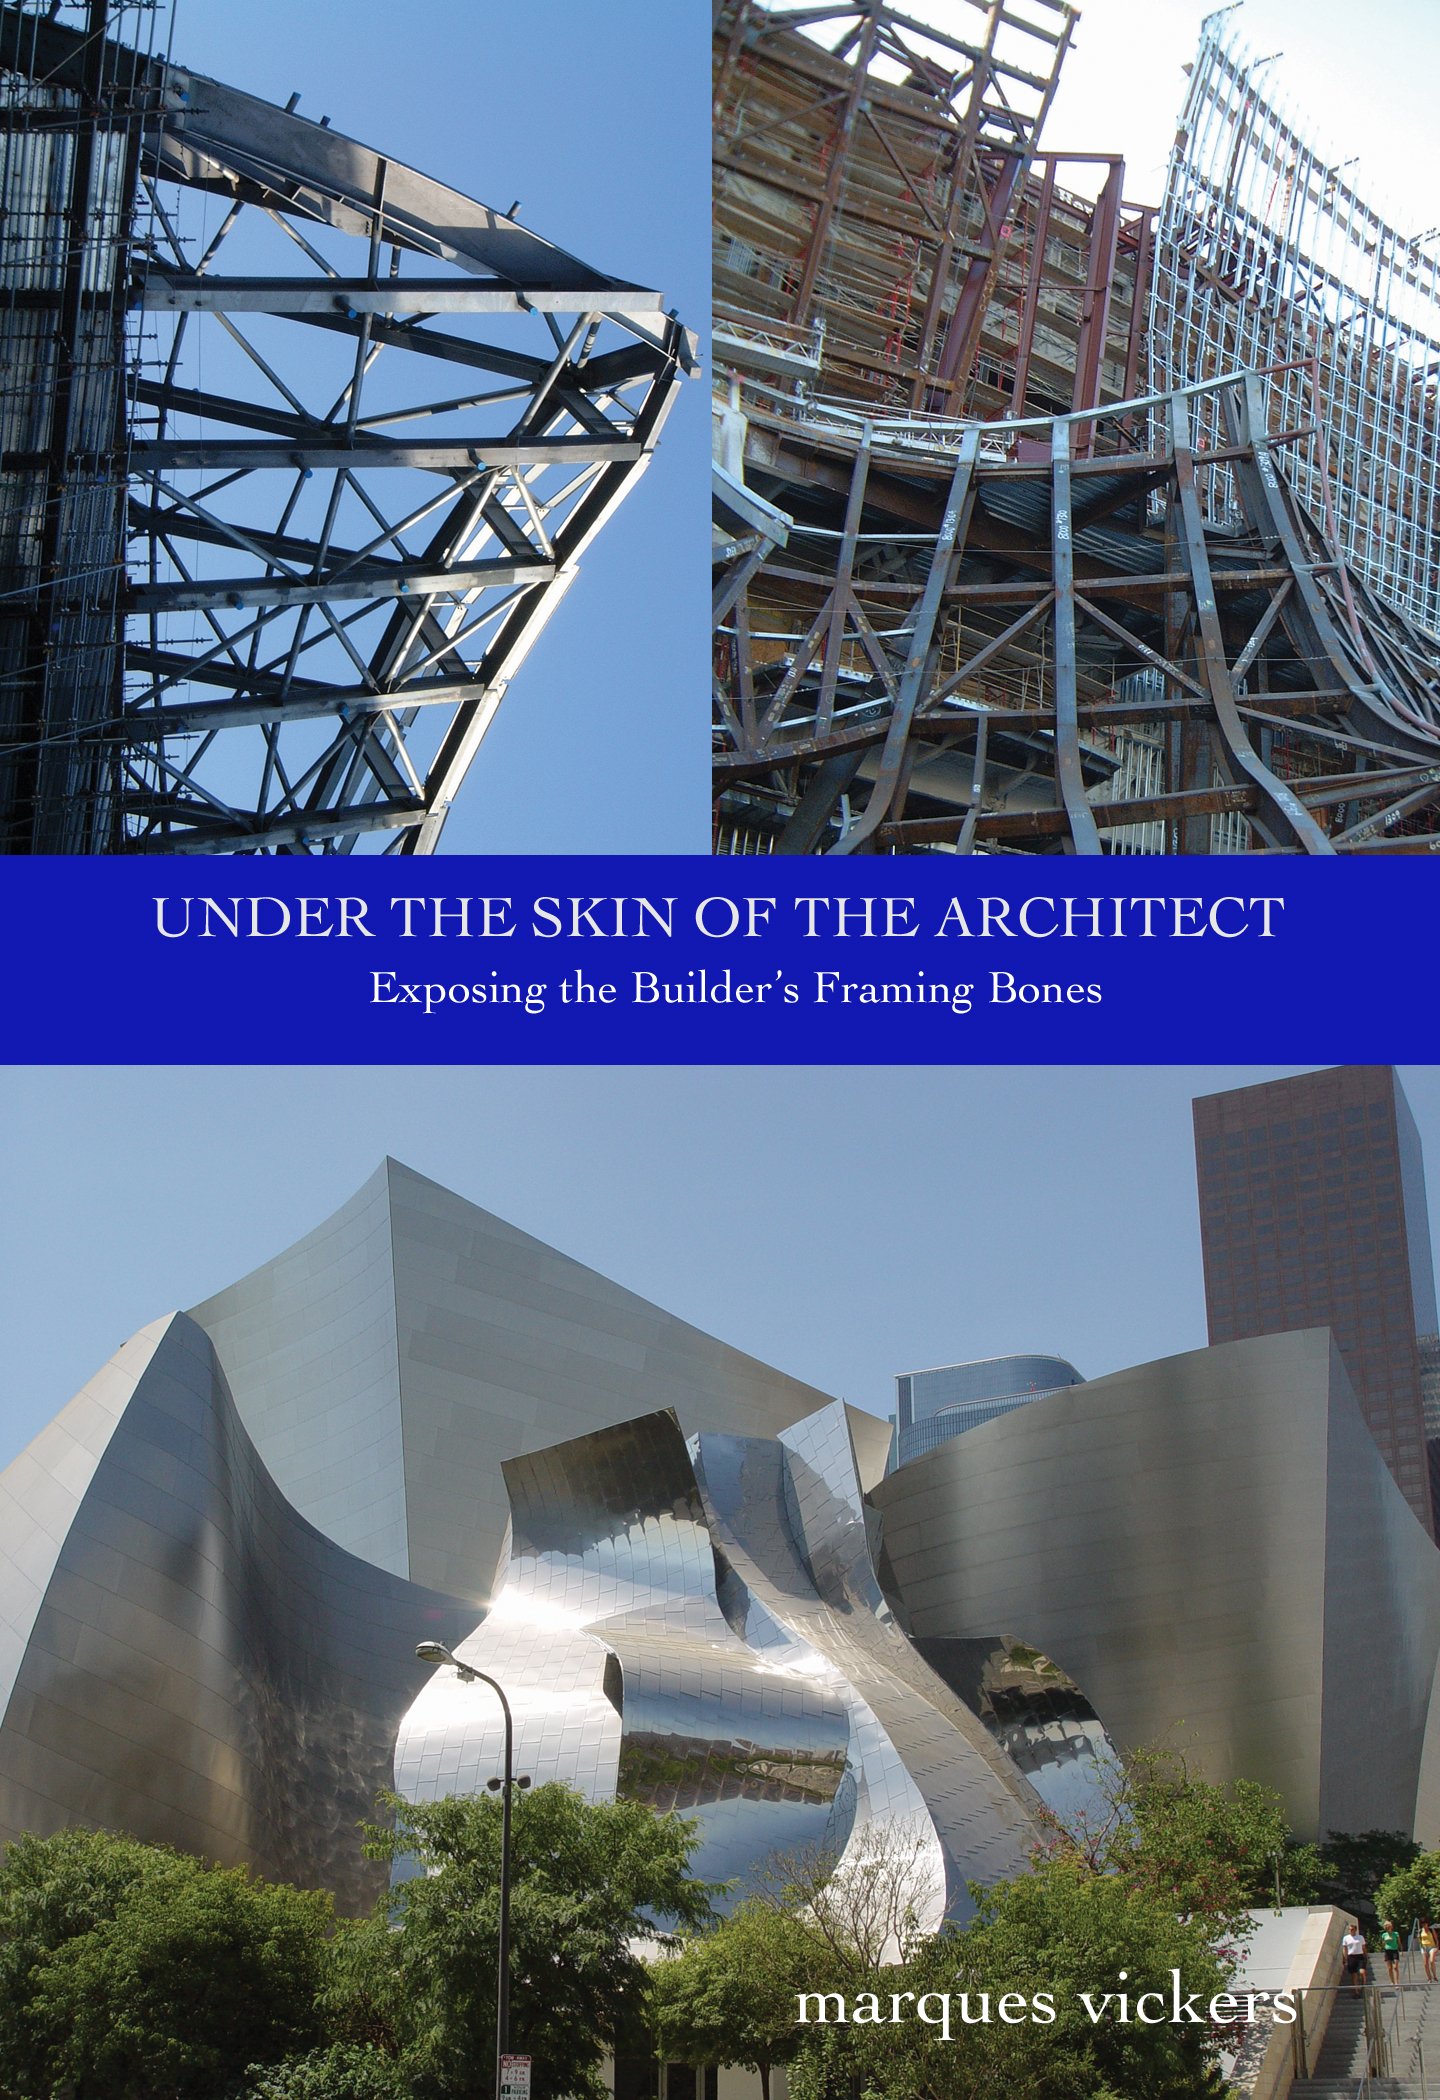 Under The Skin of the Architect: Exposing the Builder's Framing Bones: Pictorial Showcase of the Frank Gehry Designed Walt Disney Concert Hall in Downtown ... Angeles (Pacific Coast Architecture Series)